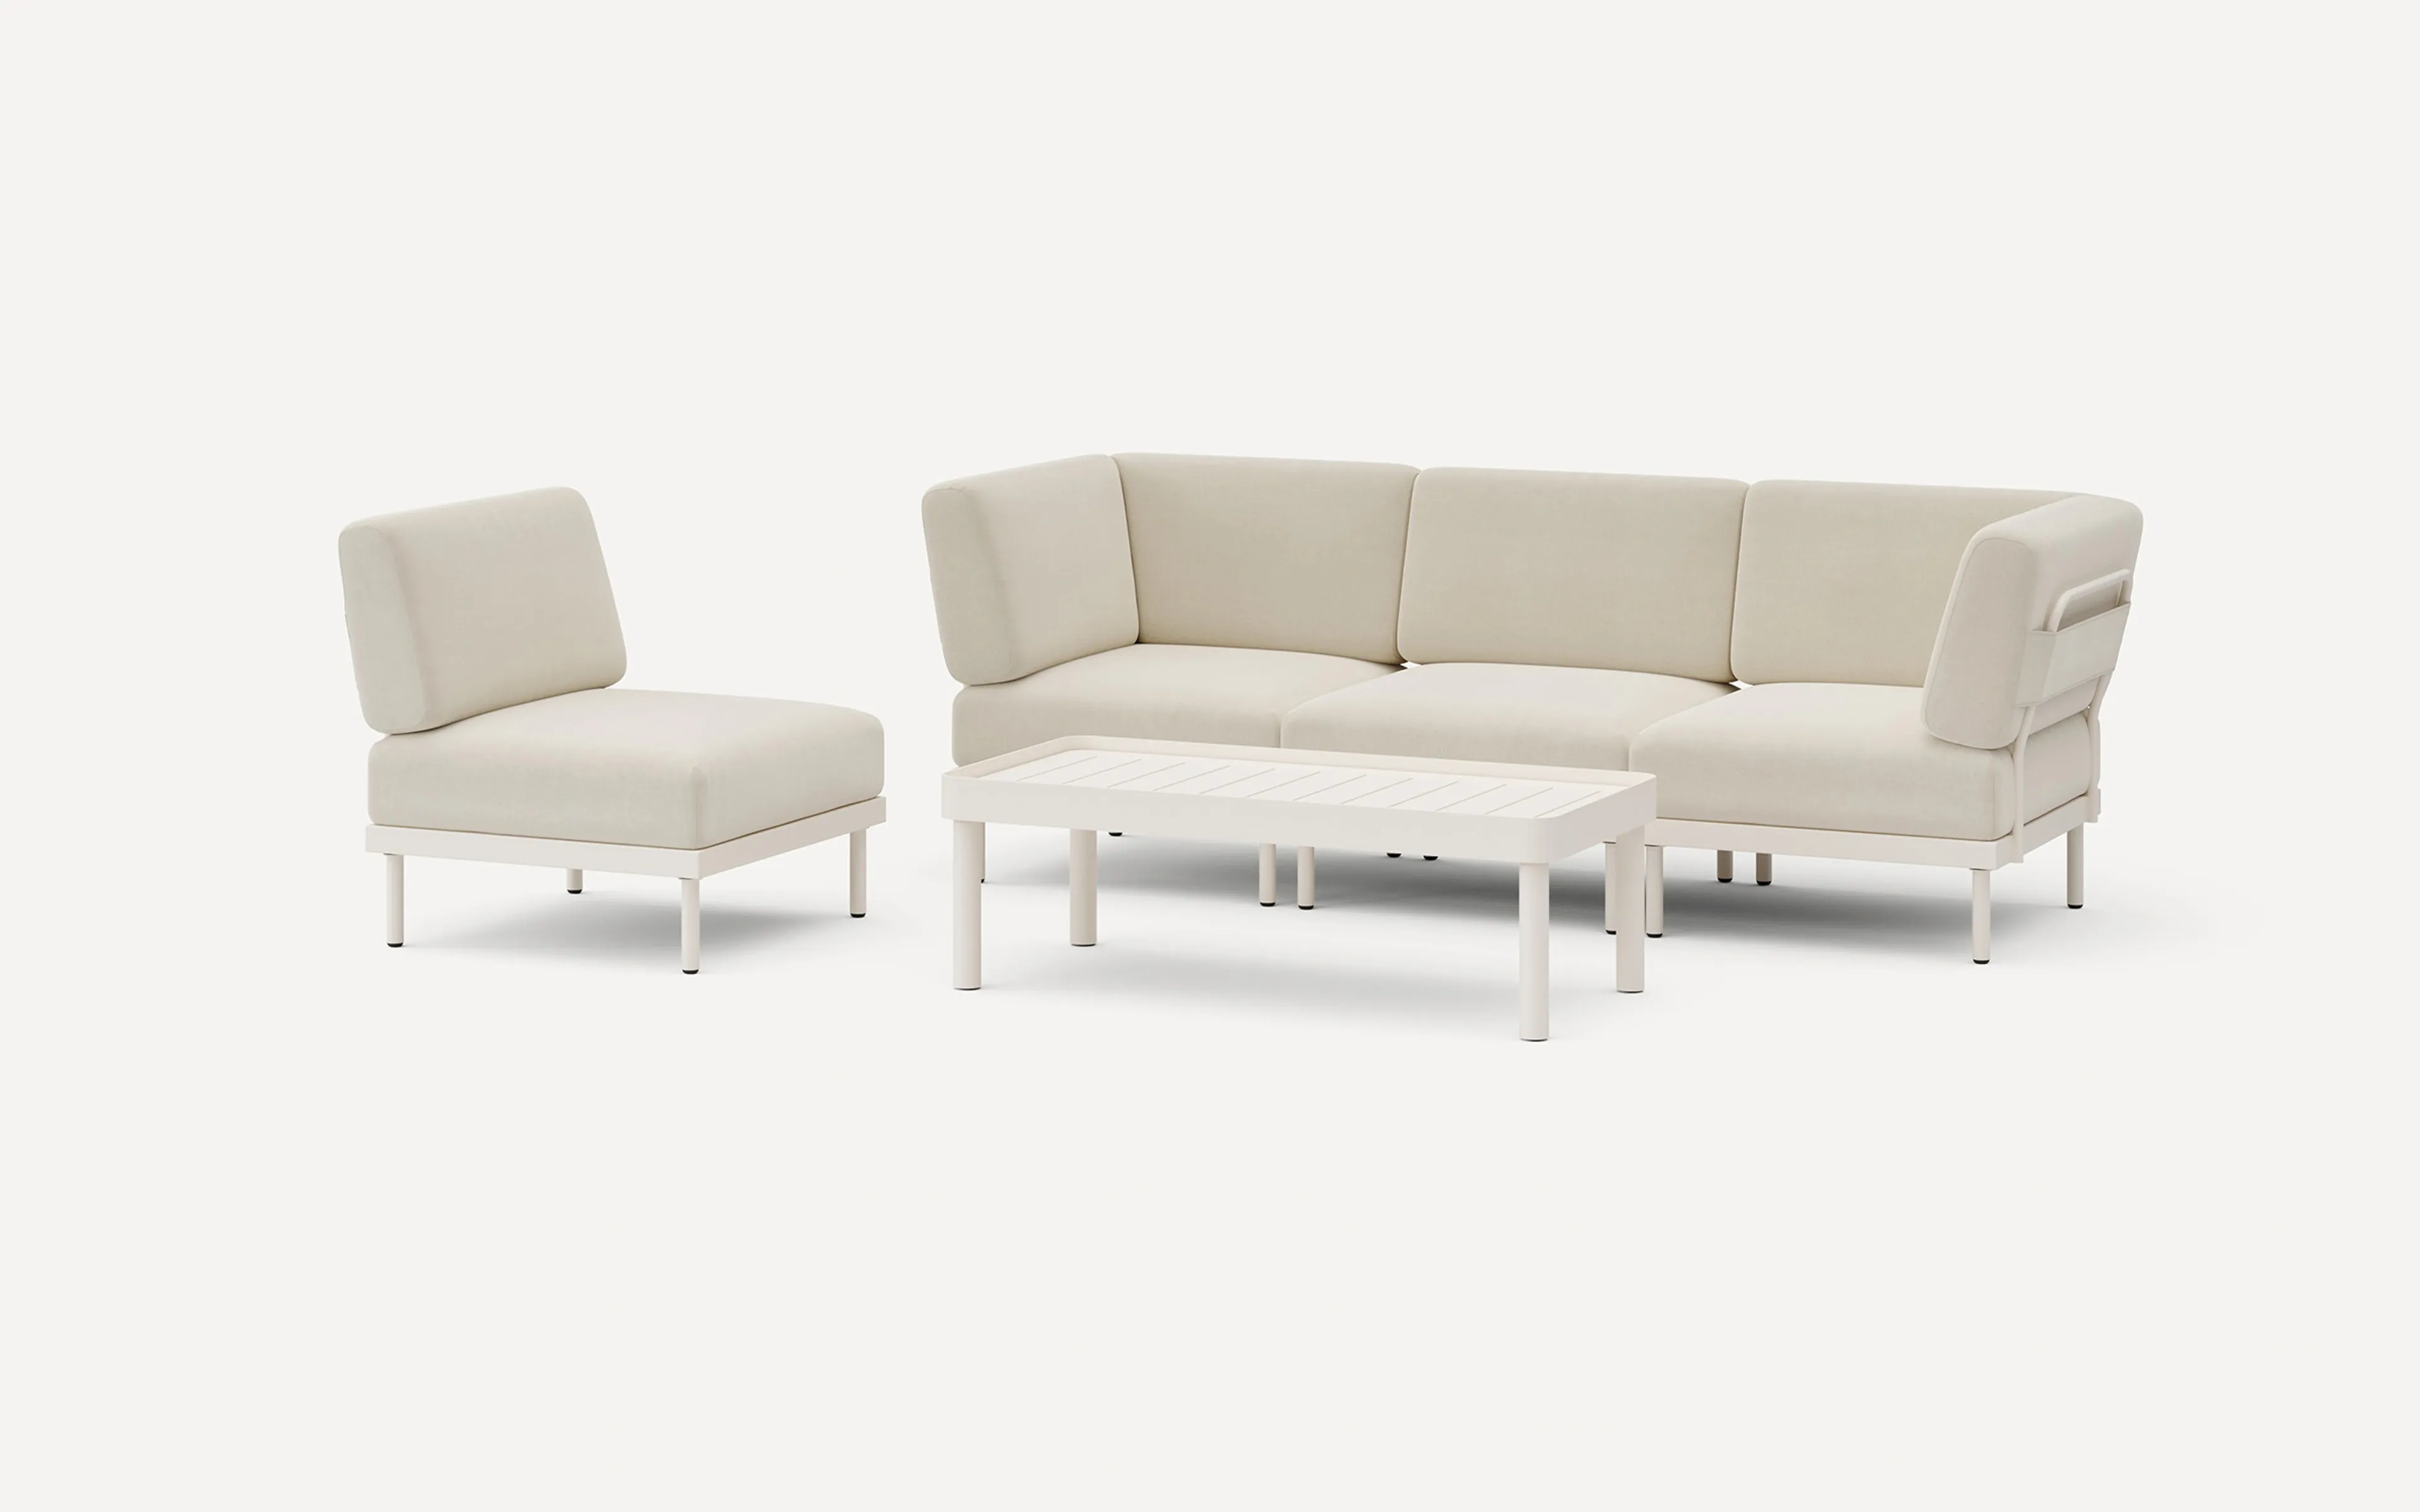 Relay Outdoor 3-Piece Sofa, Chair, & Coffee Table Set